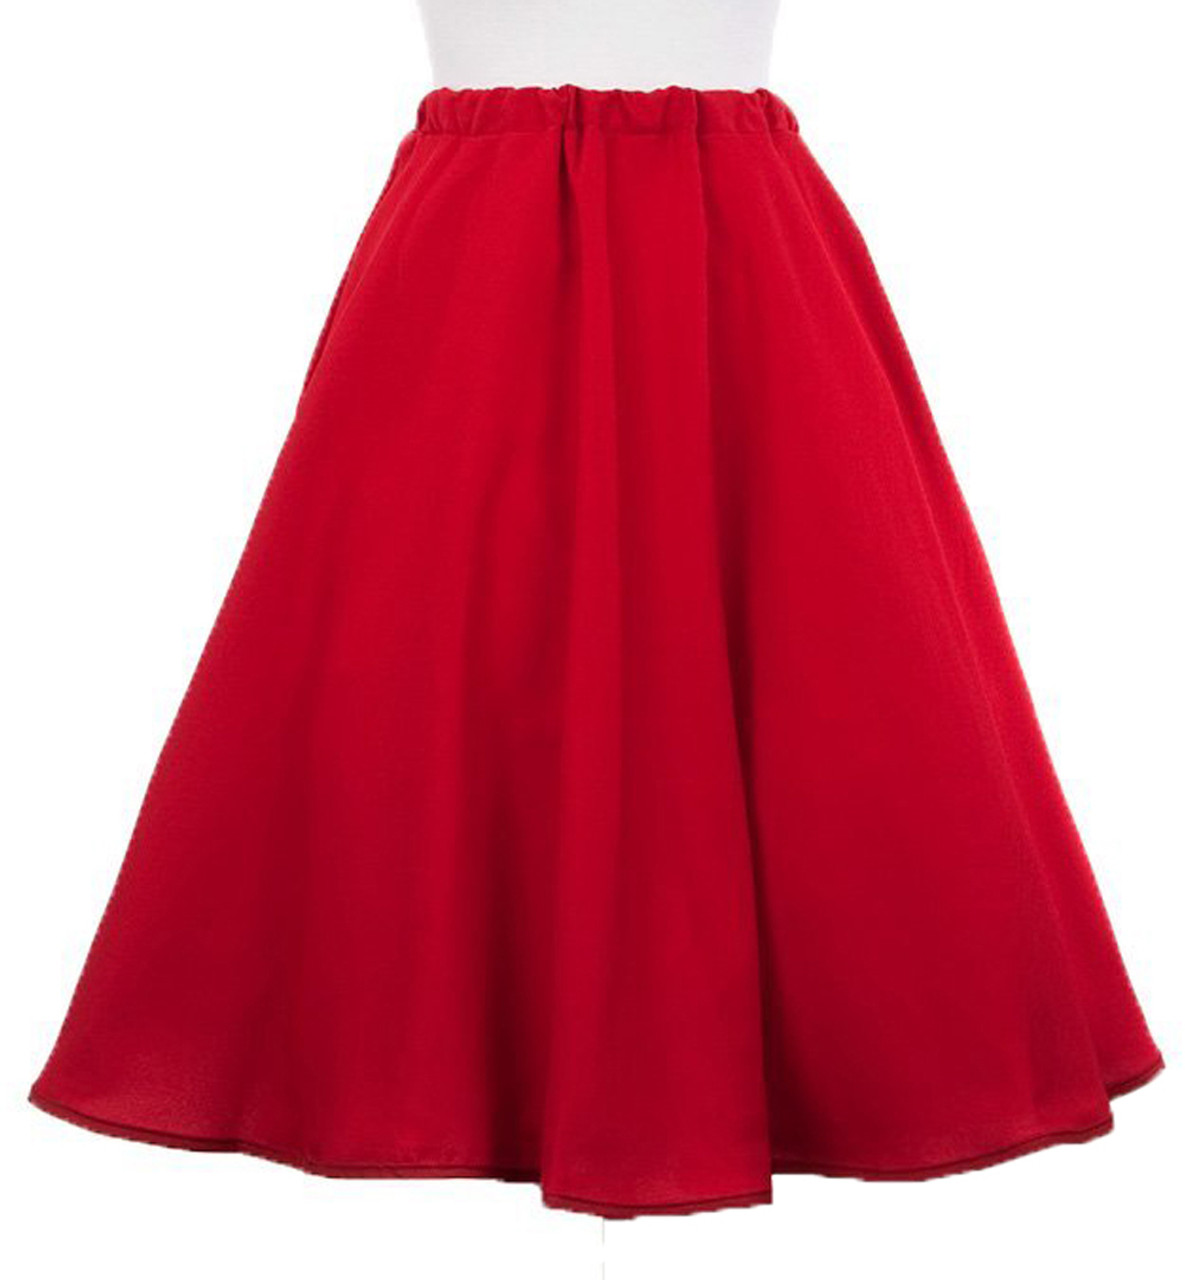 50s Style Swing Circle Skirt in black, pink, red, and blue